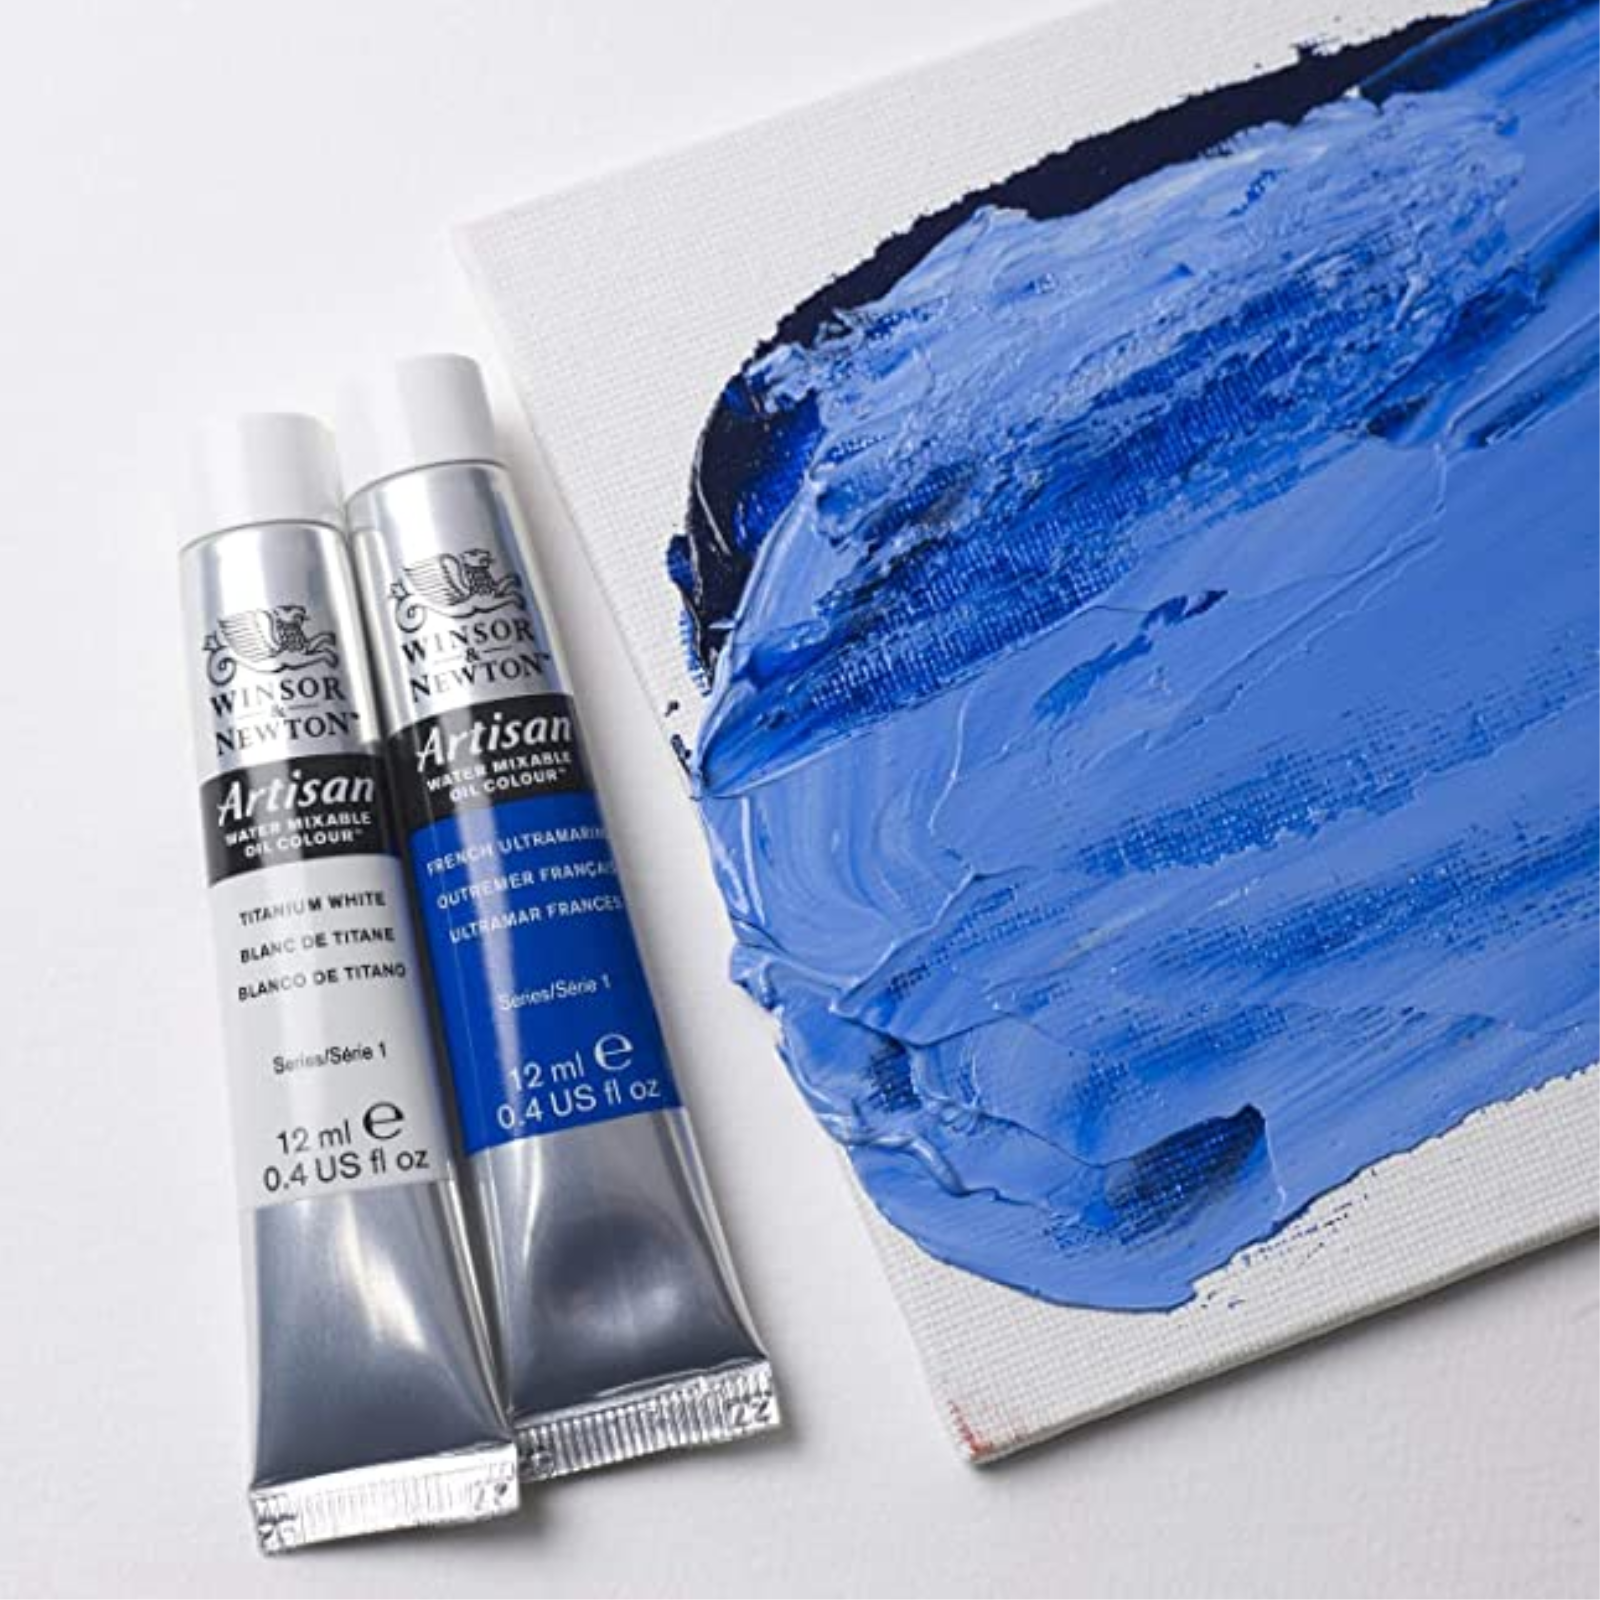 Winsor & Newton Artisan Water Mixable Oil Colour Set - also Perfect for an accomplished painter